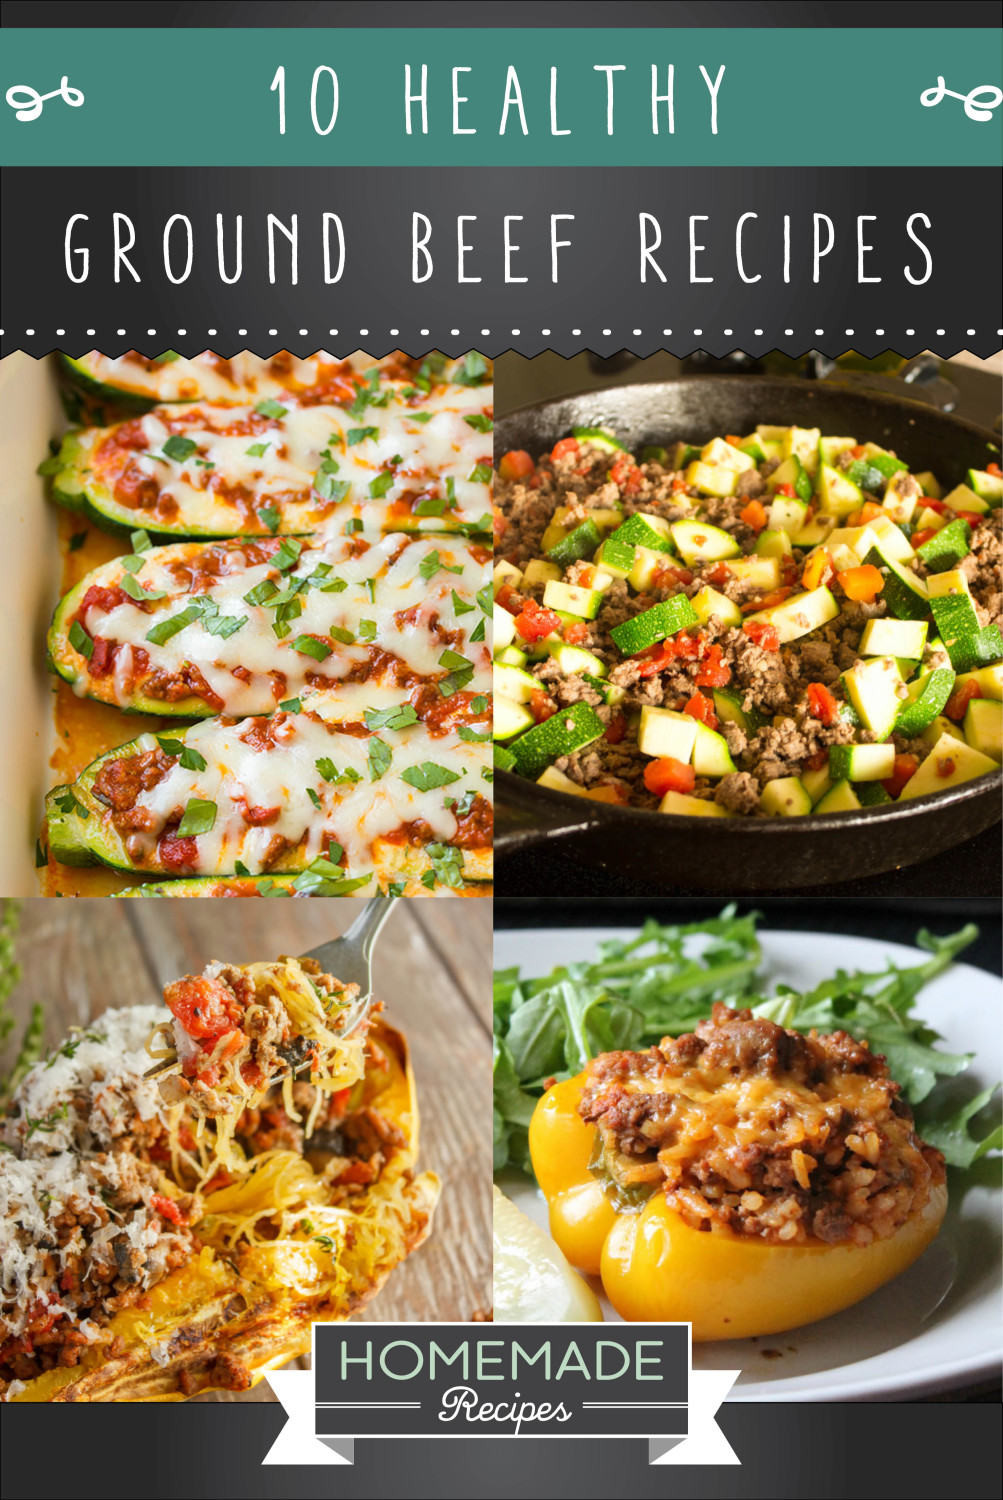 Healthy Meals To Make With Ground Beef
 10 Healthy Ground Beef Recipes